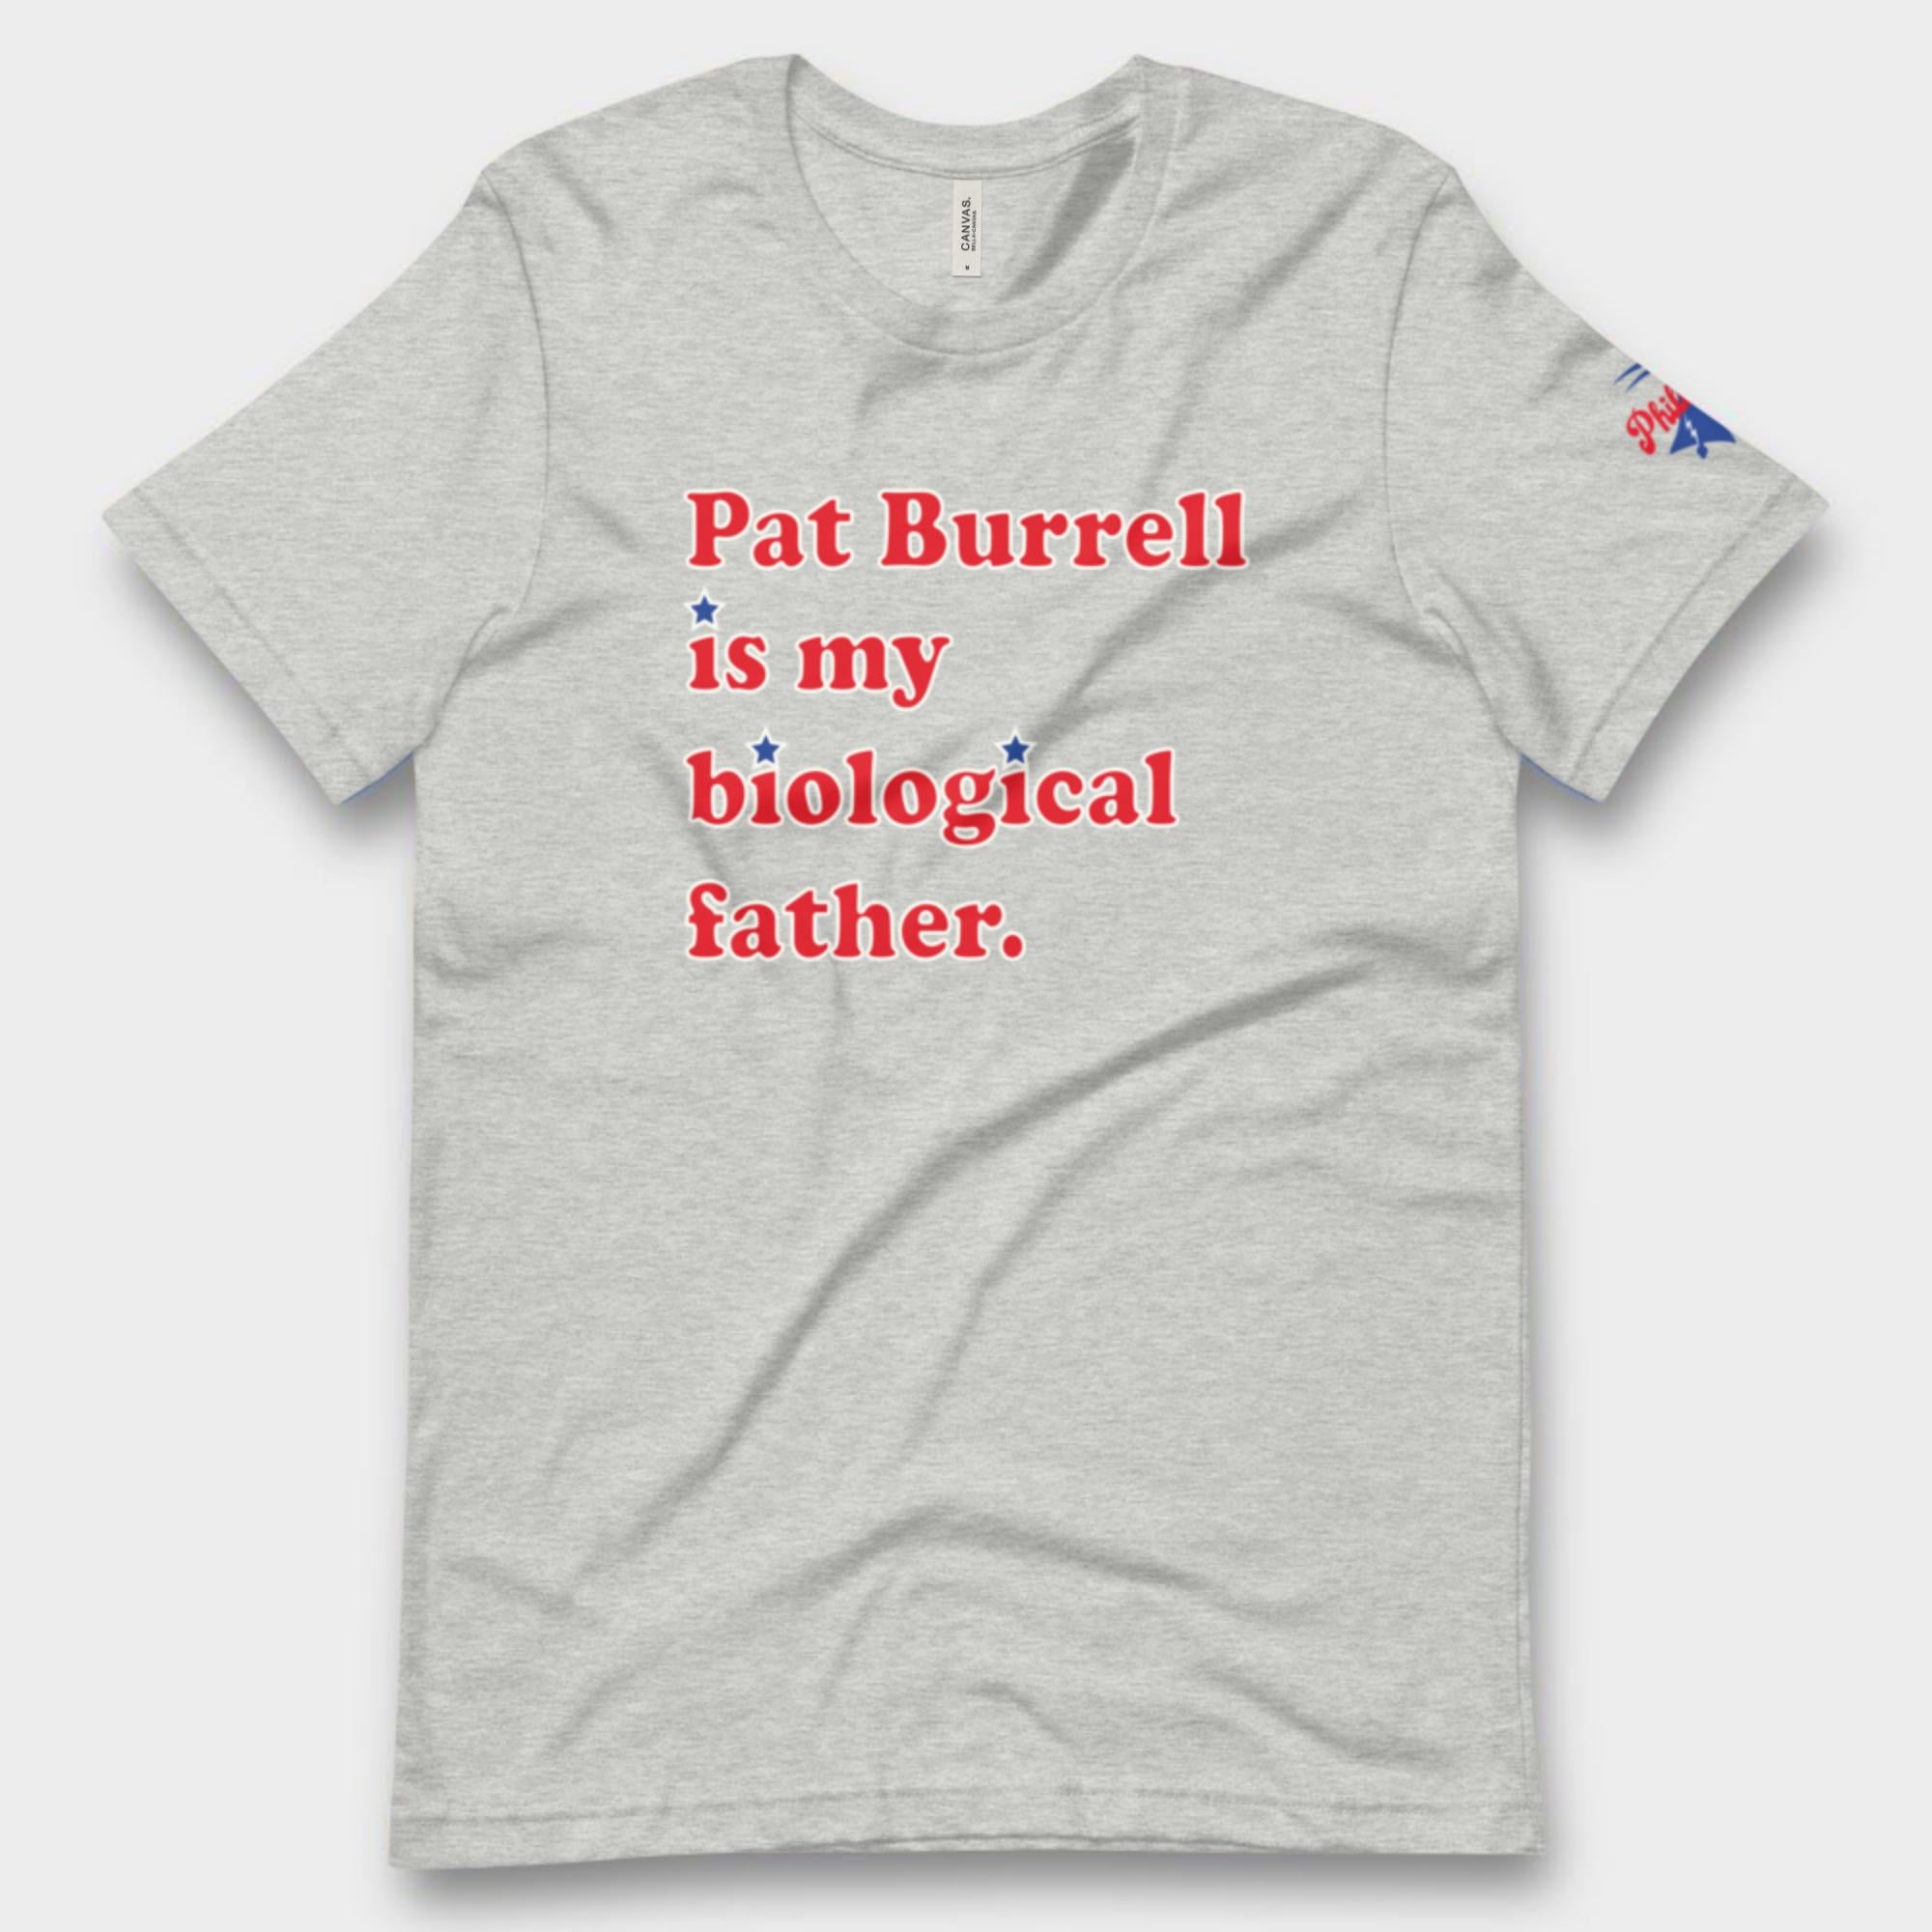 "Pat Burrell Is My Biological Father" Tee